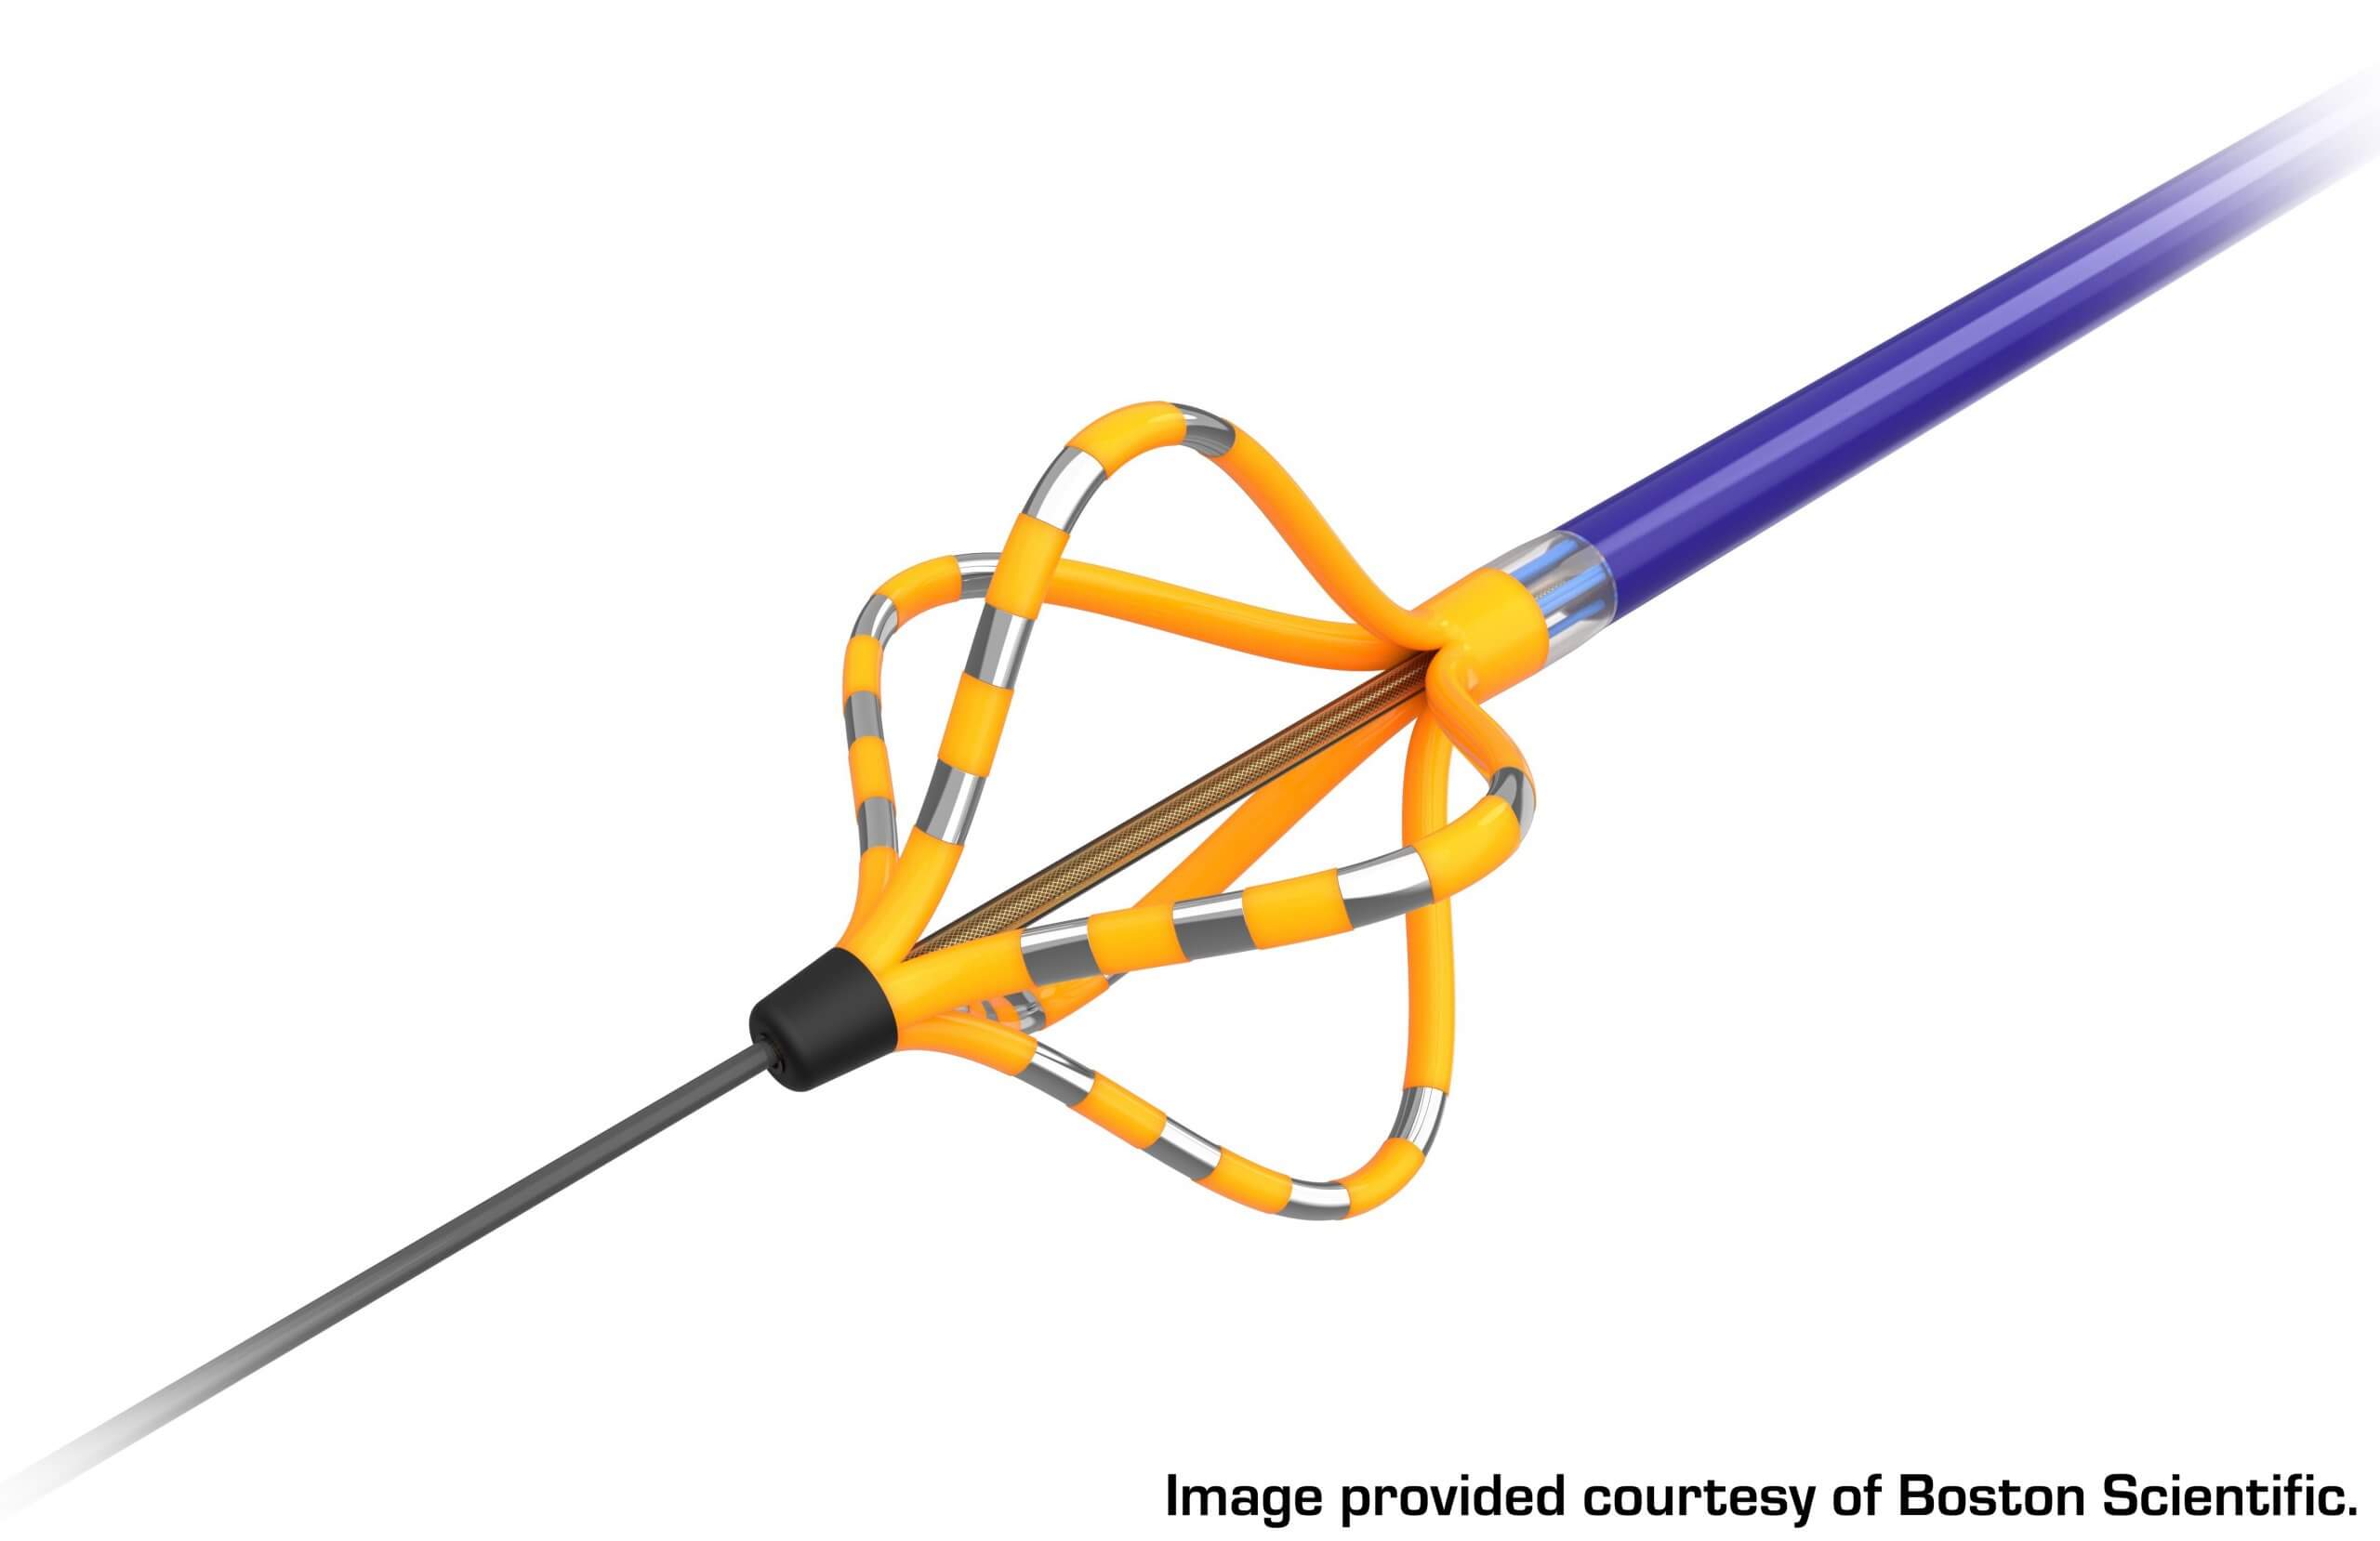 A rendering of Boston Scientific’s FARAWAVE Pulsed Field Ablation Catheter